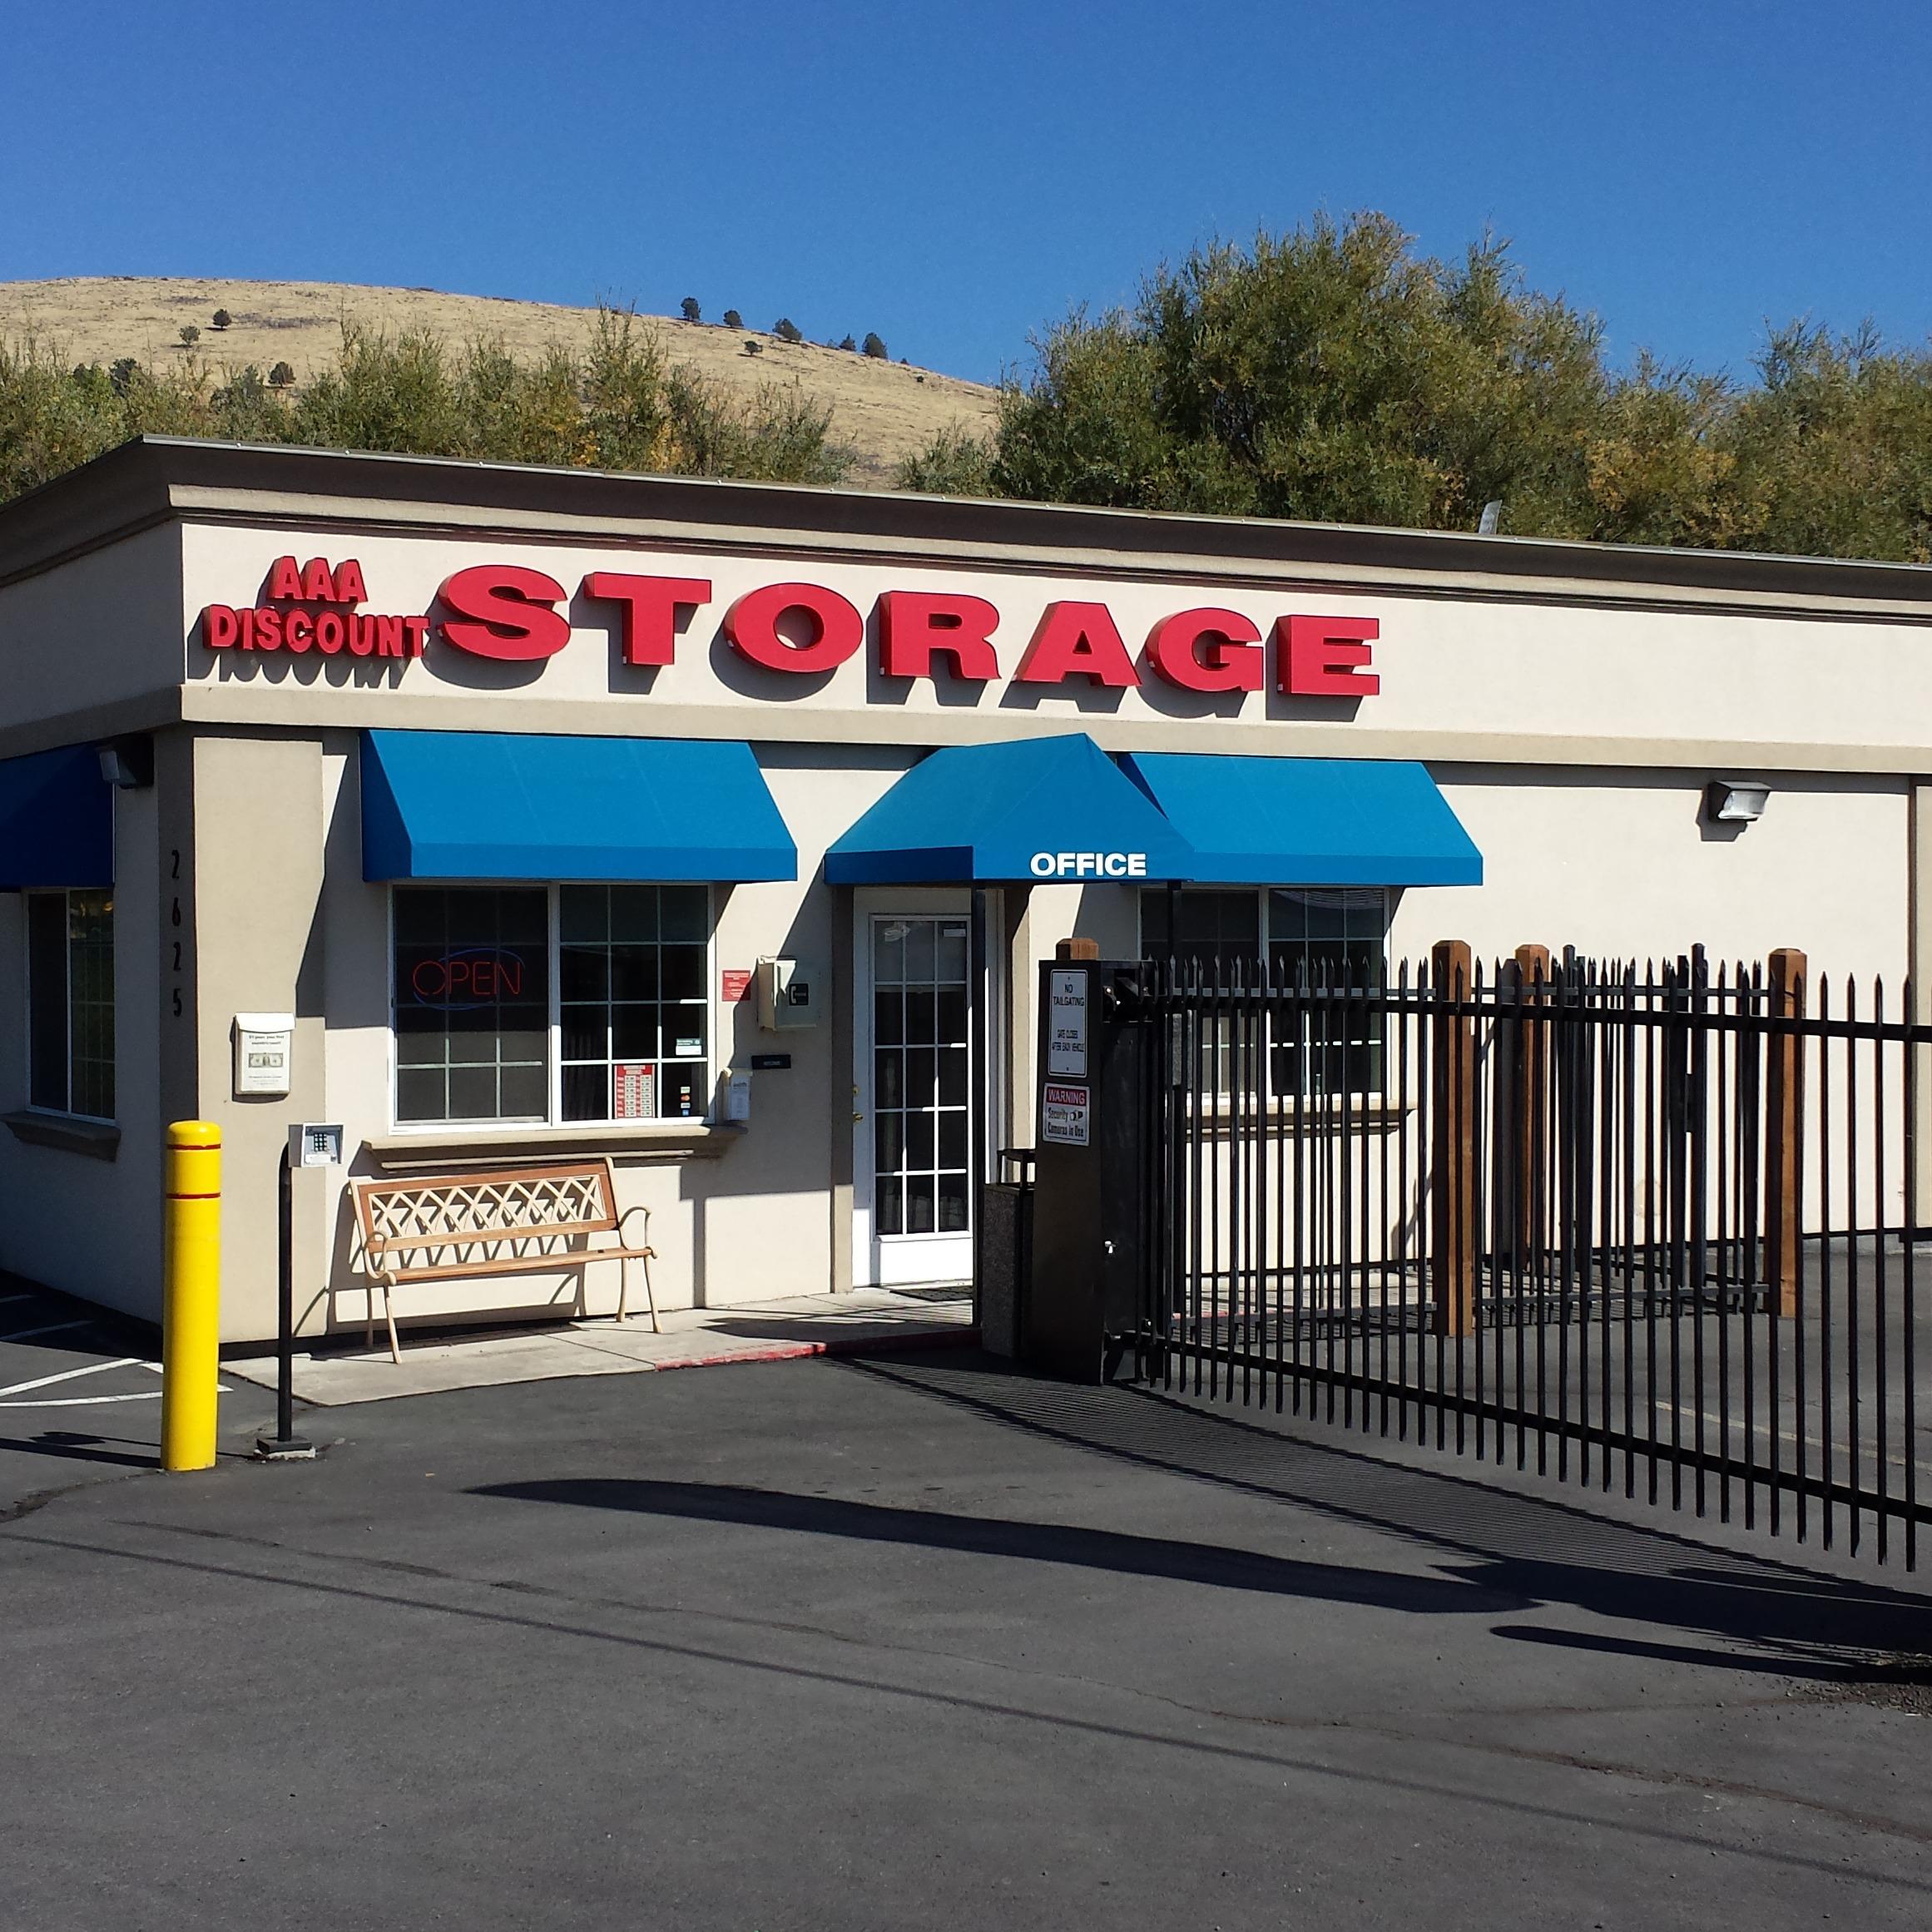 AAA Discount Storage Coupons near me in Klamath Falls ...